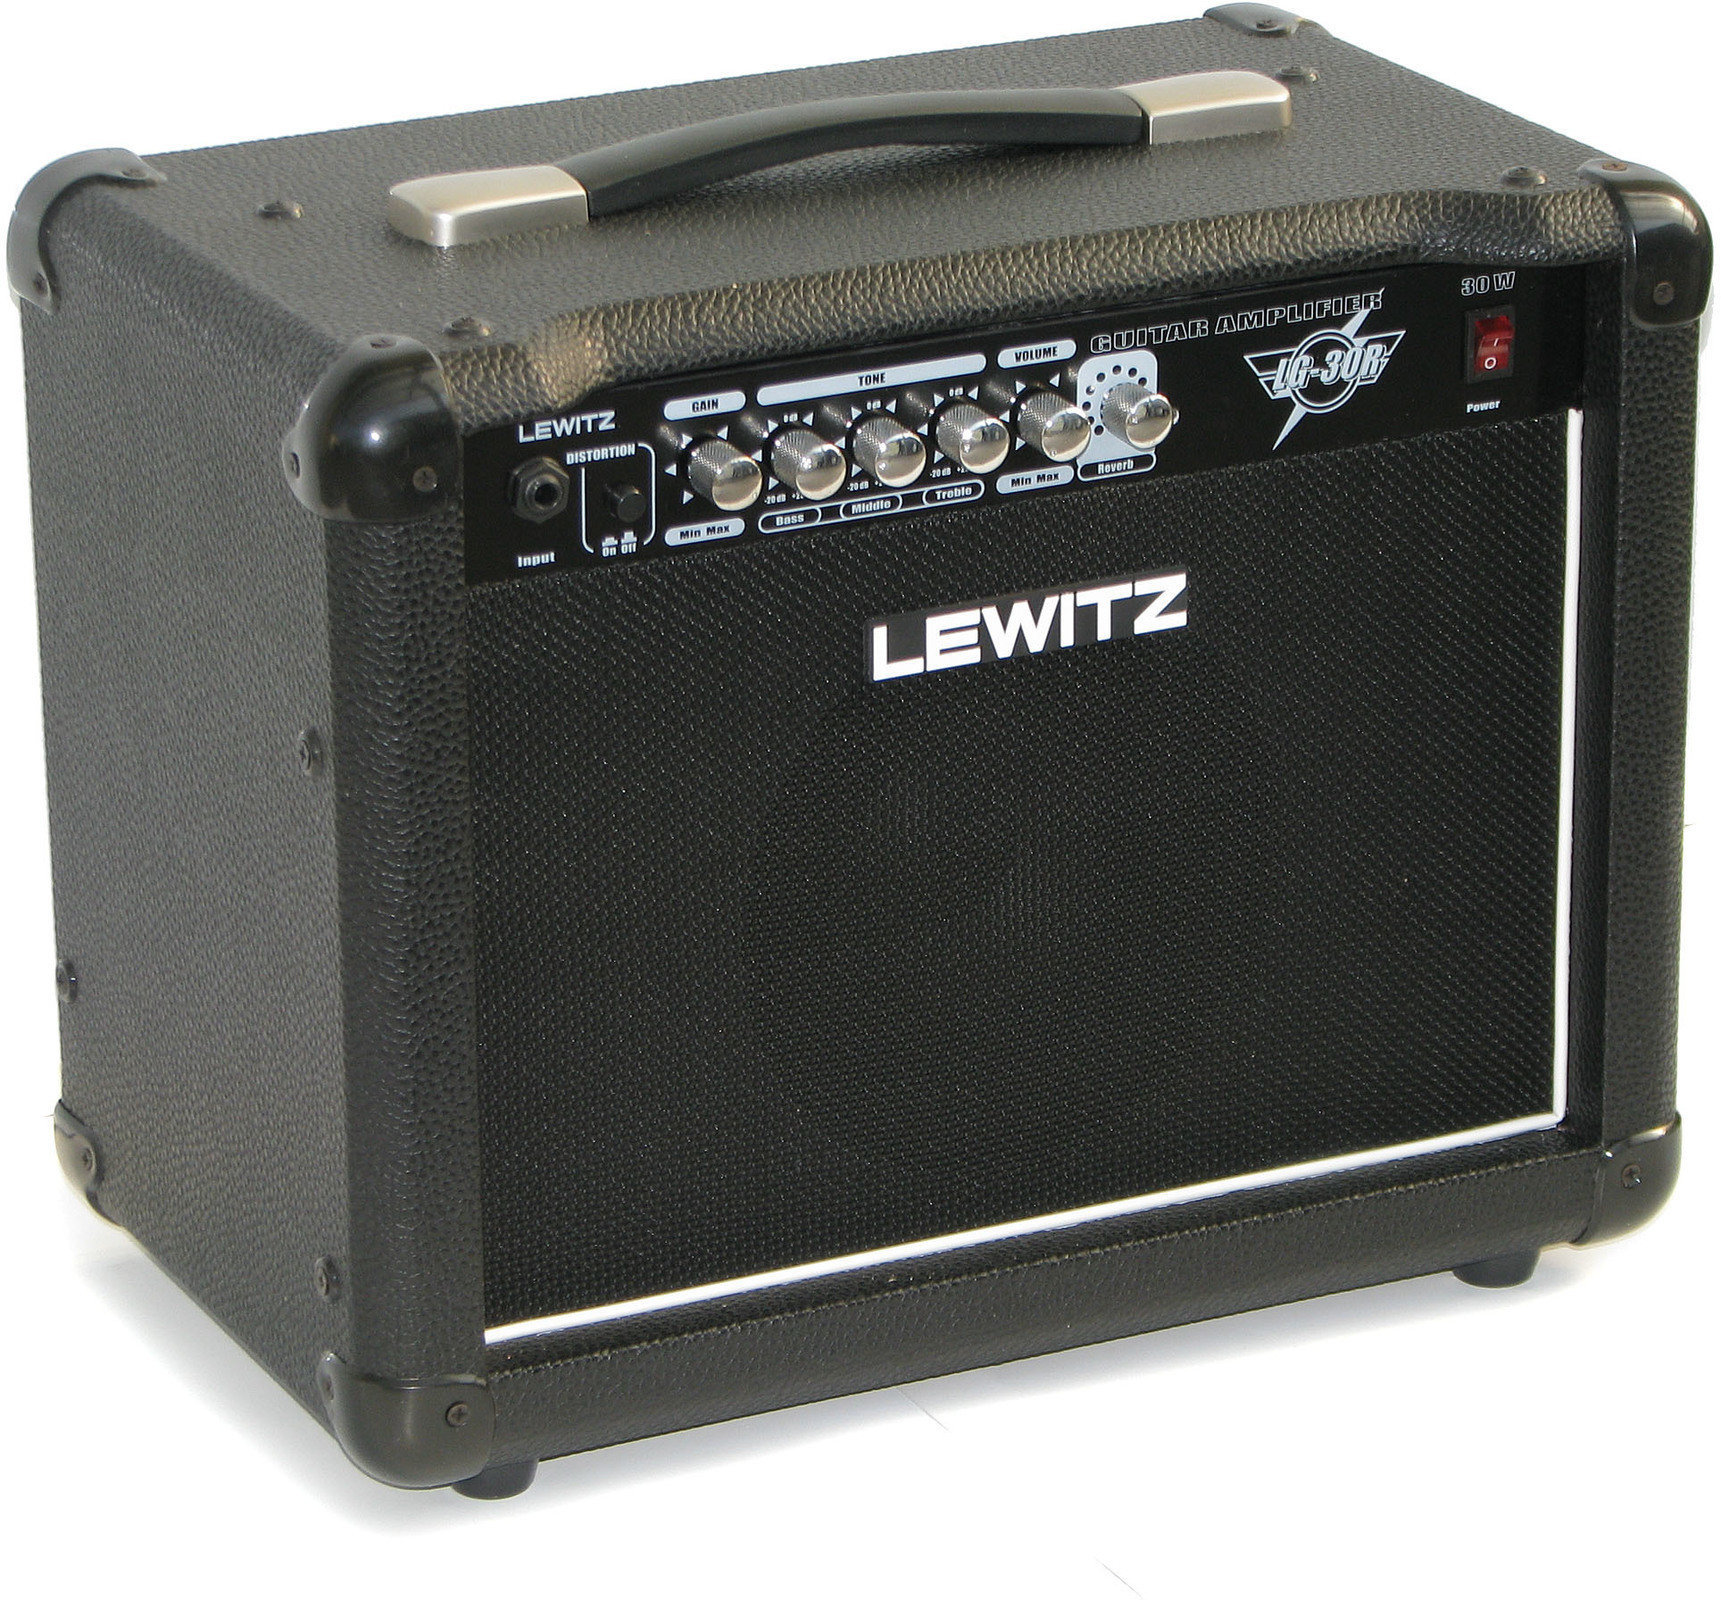 Solid-State Combo Lewitz LG 30 R